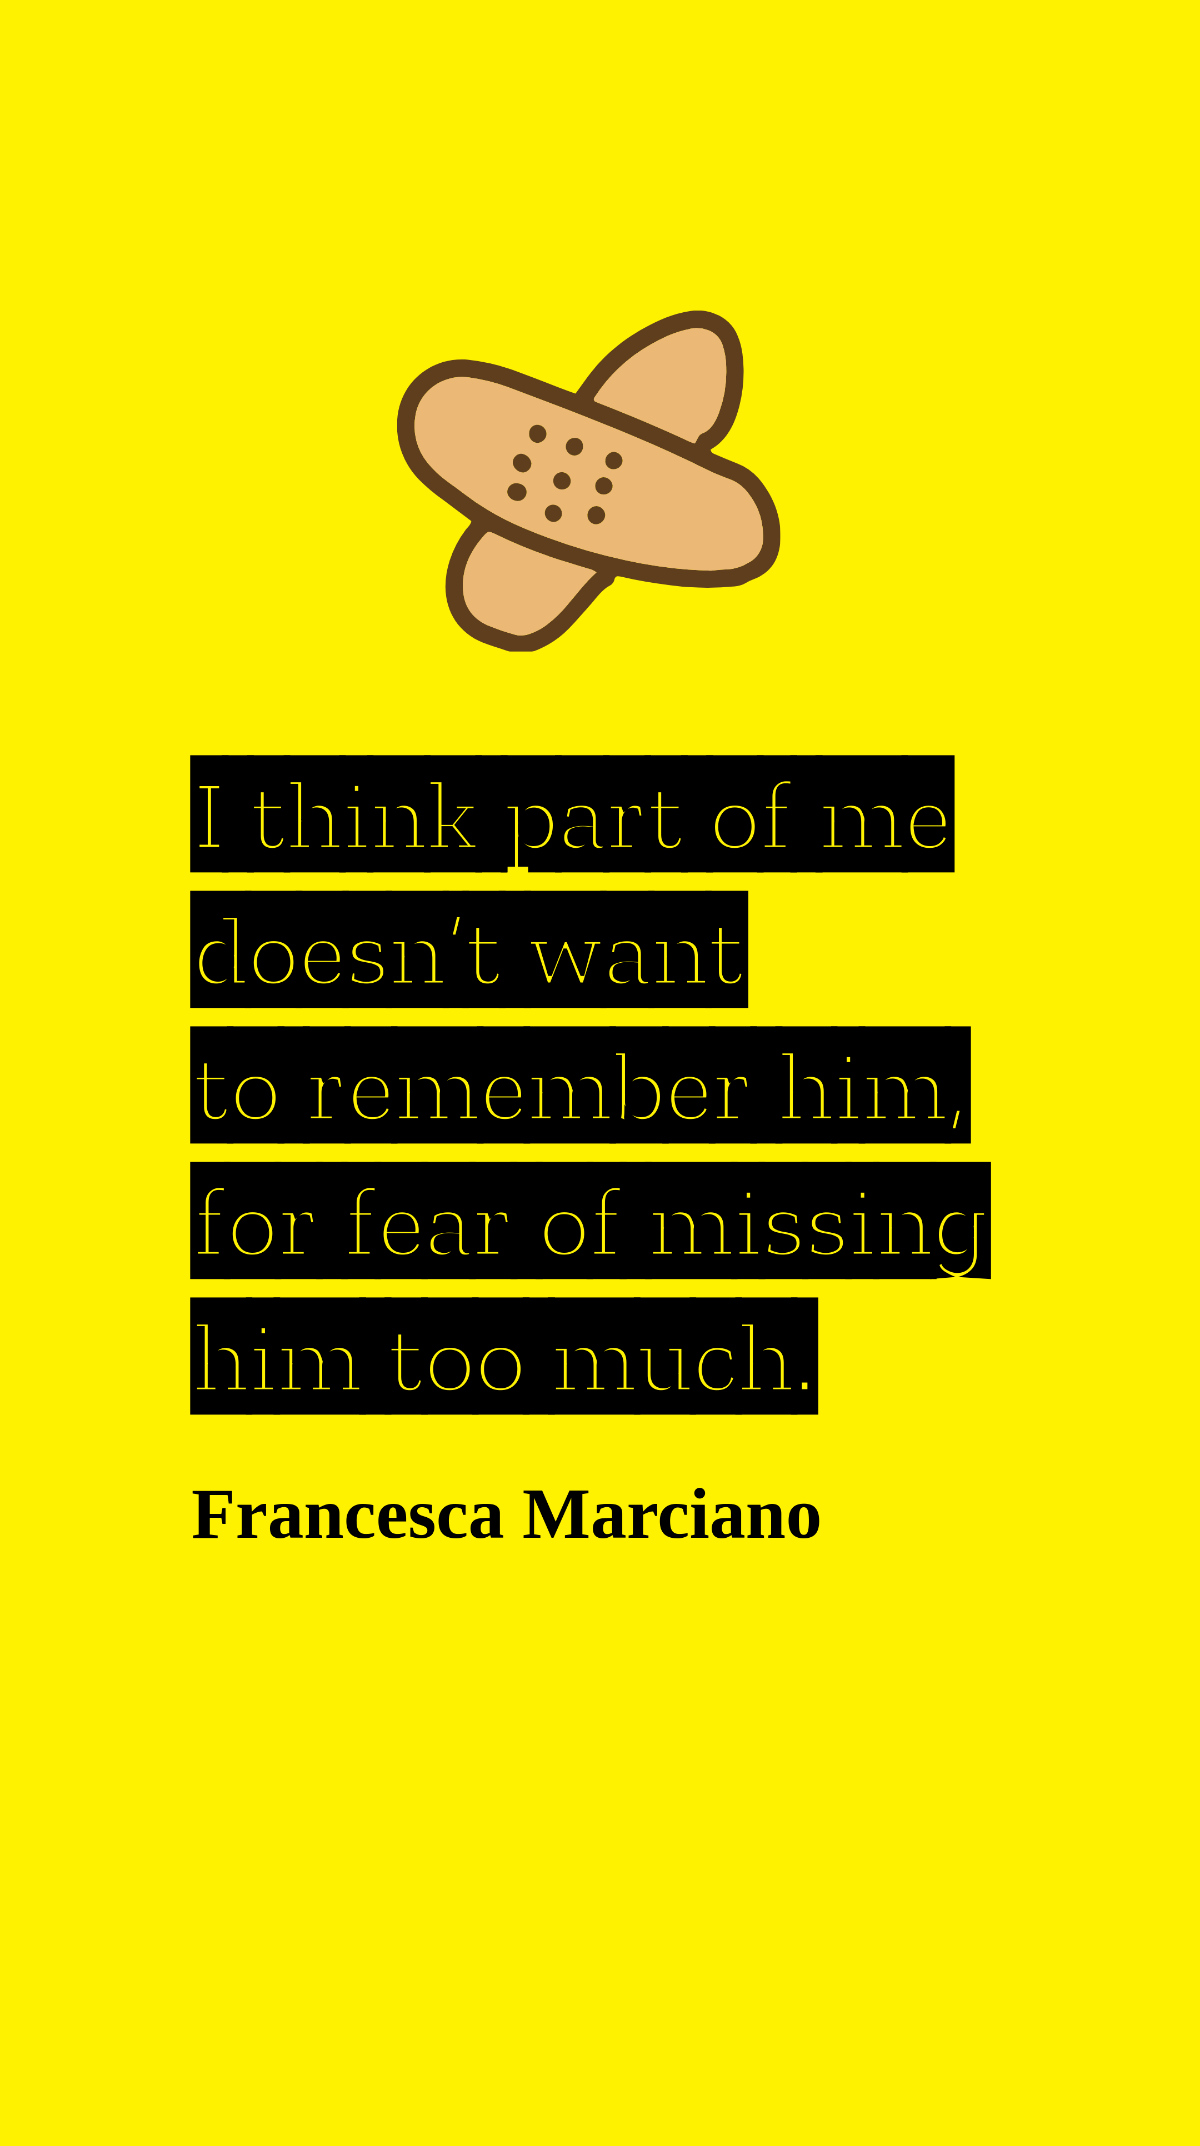 Free Francesca Marciano - I think part of me doesn’t want to remember him, for fear of missing him too much. Template